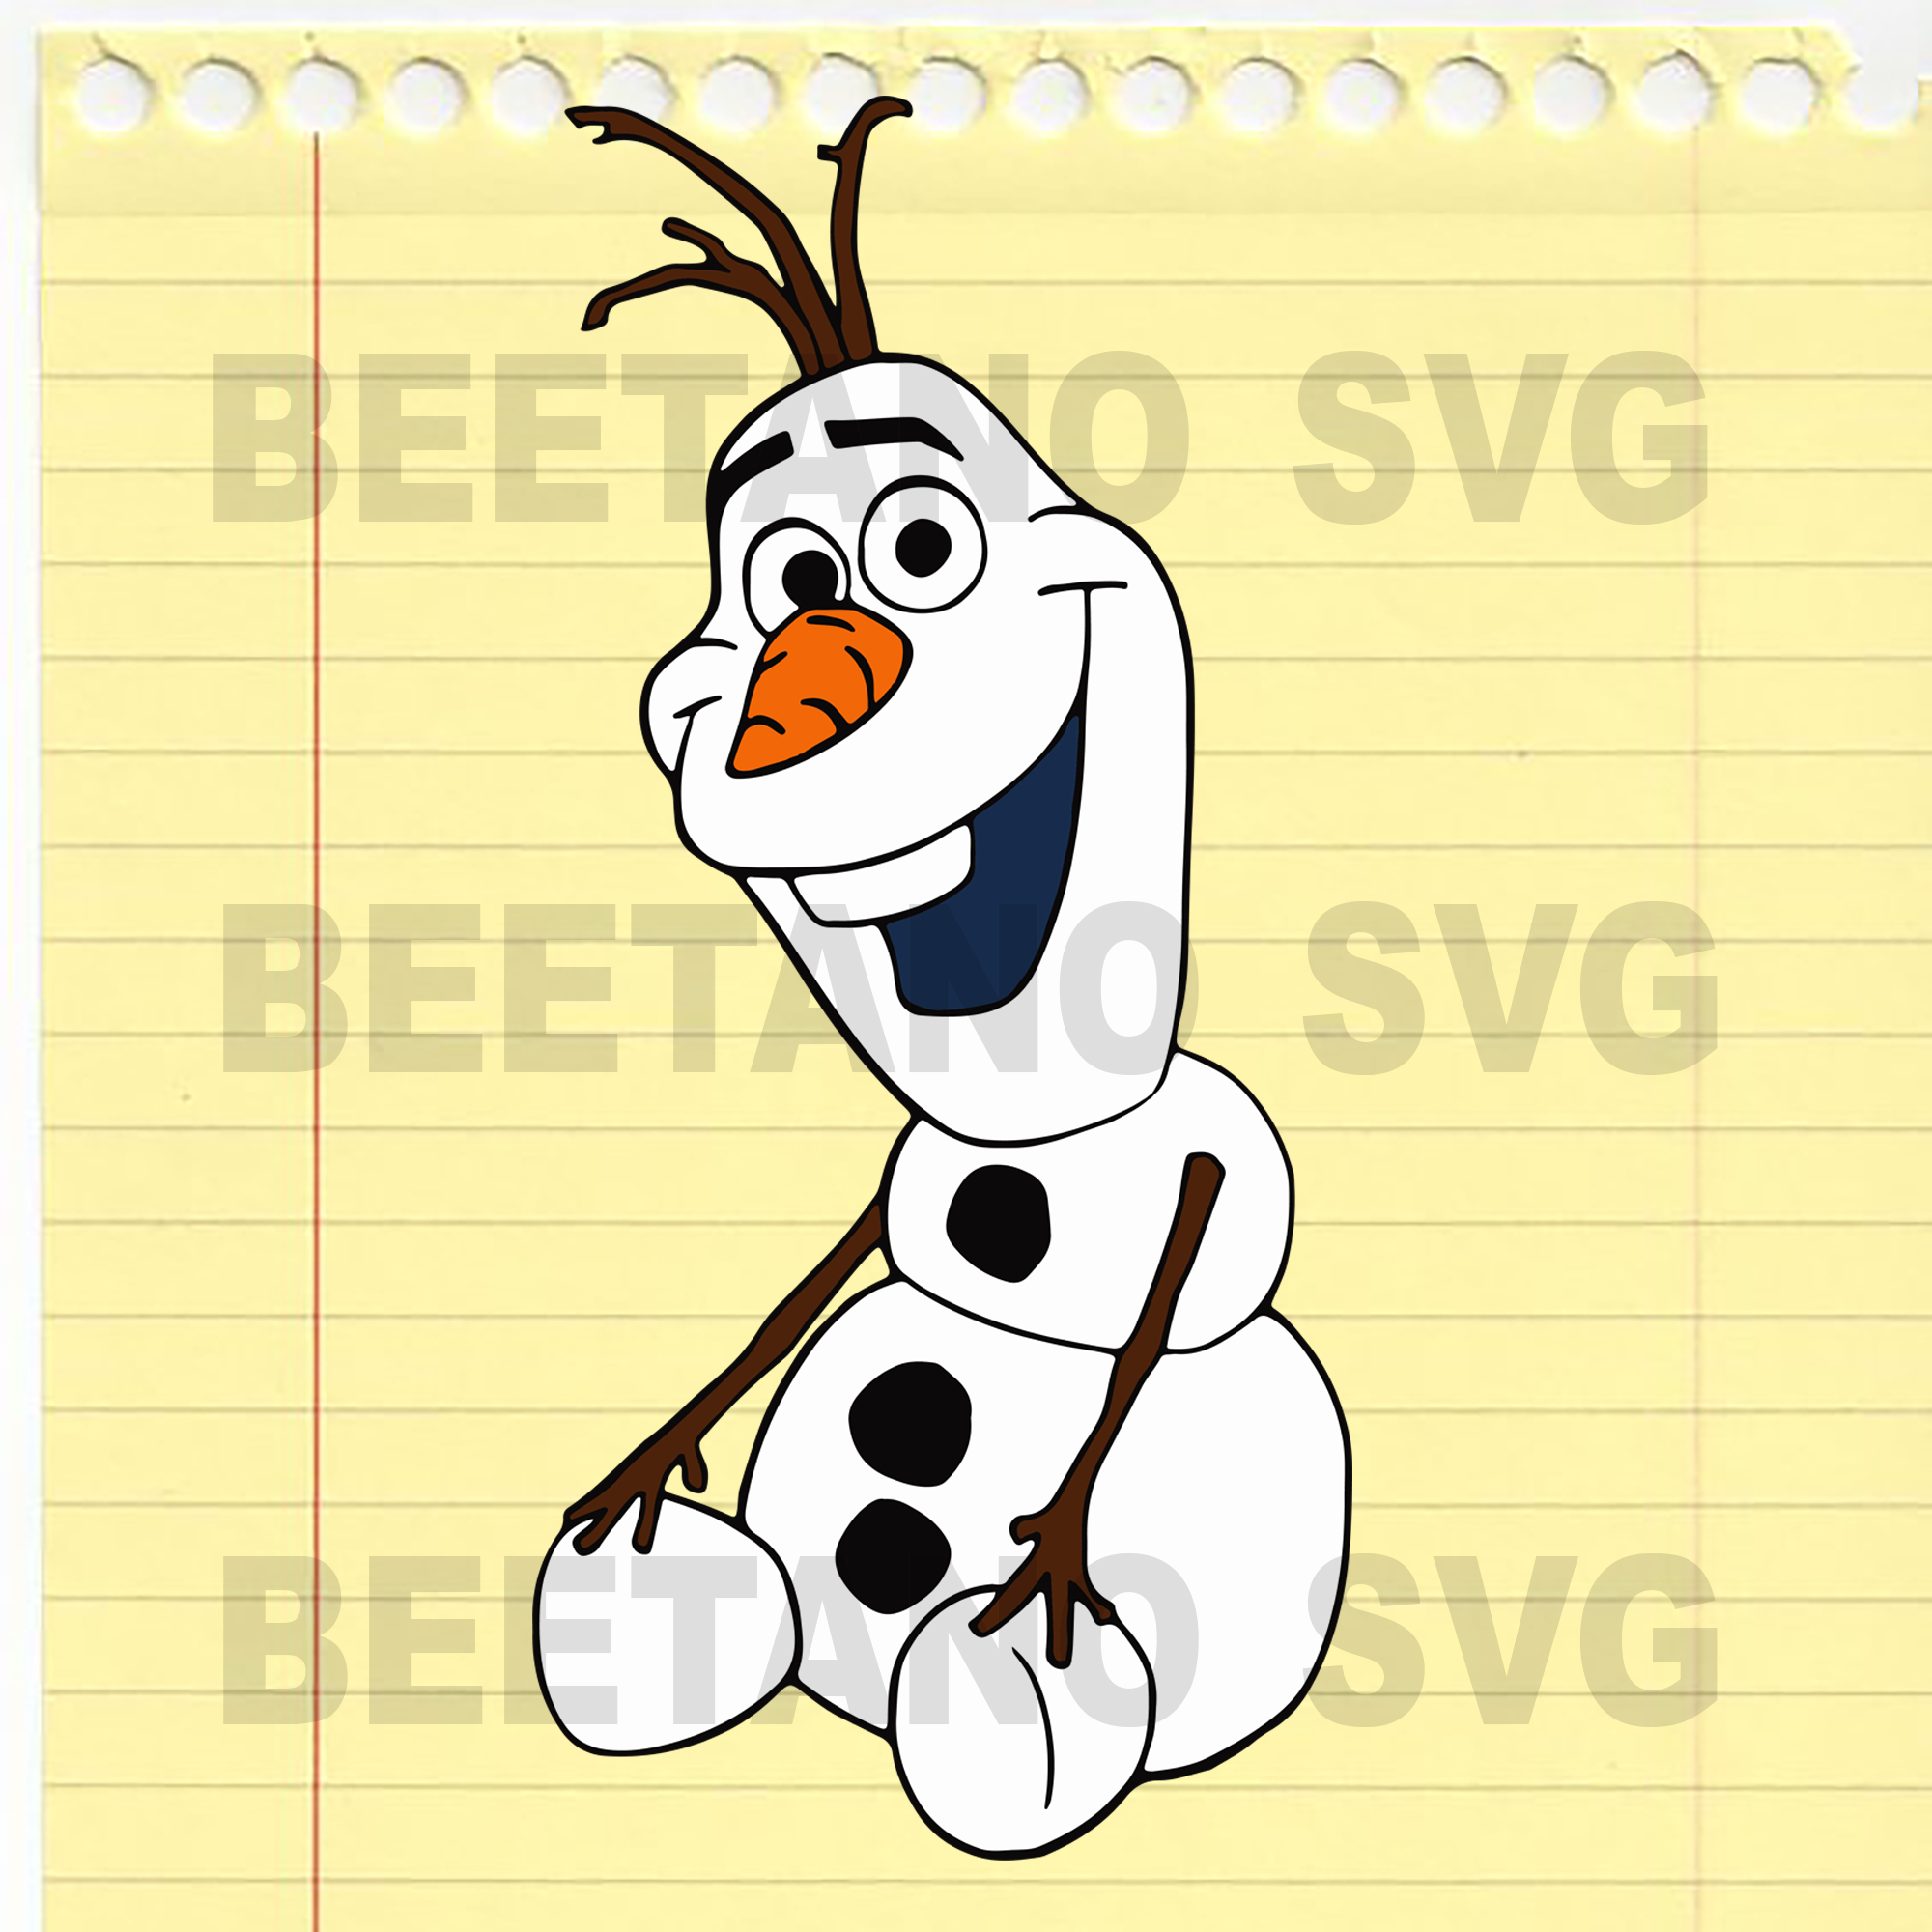 Download Olaf Svg Olaf Svg Files Frozen Olaf Svg Files Olaf Cutting Files Fo Beetanosvg Scalable Vector Graphics SVG, PNG, EPS, DXF File